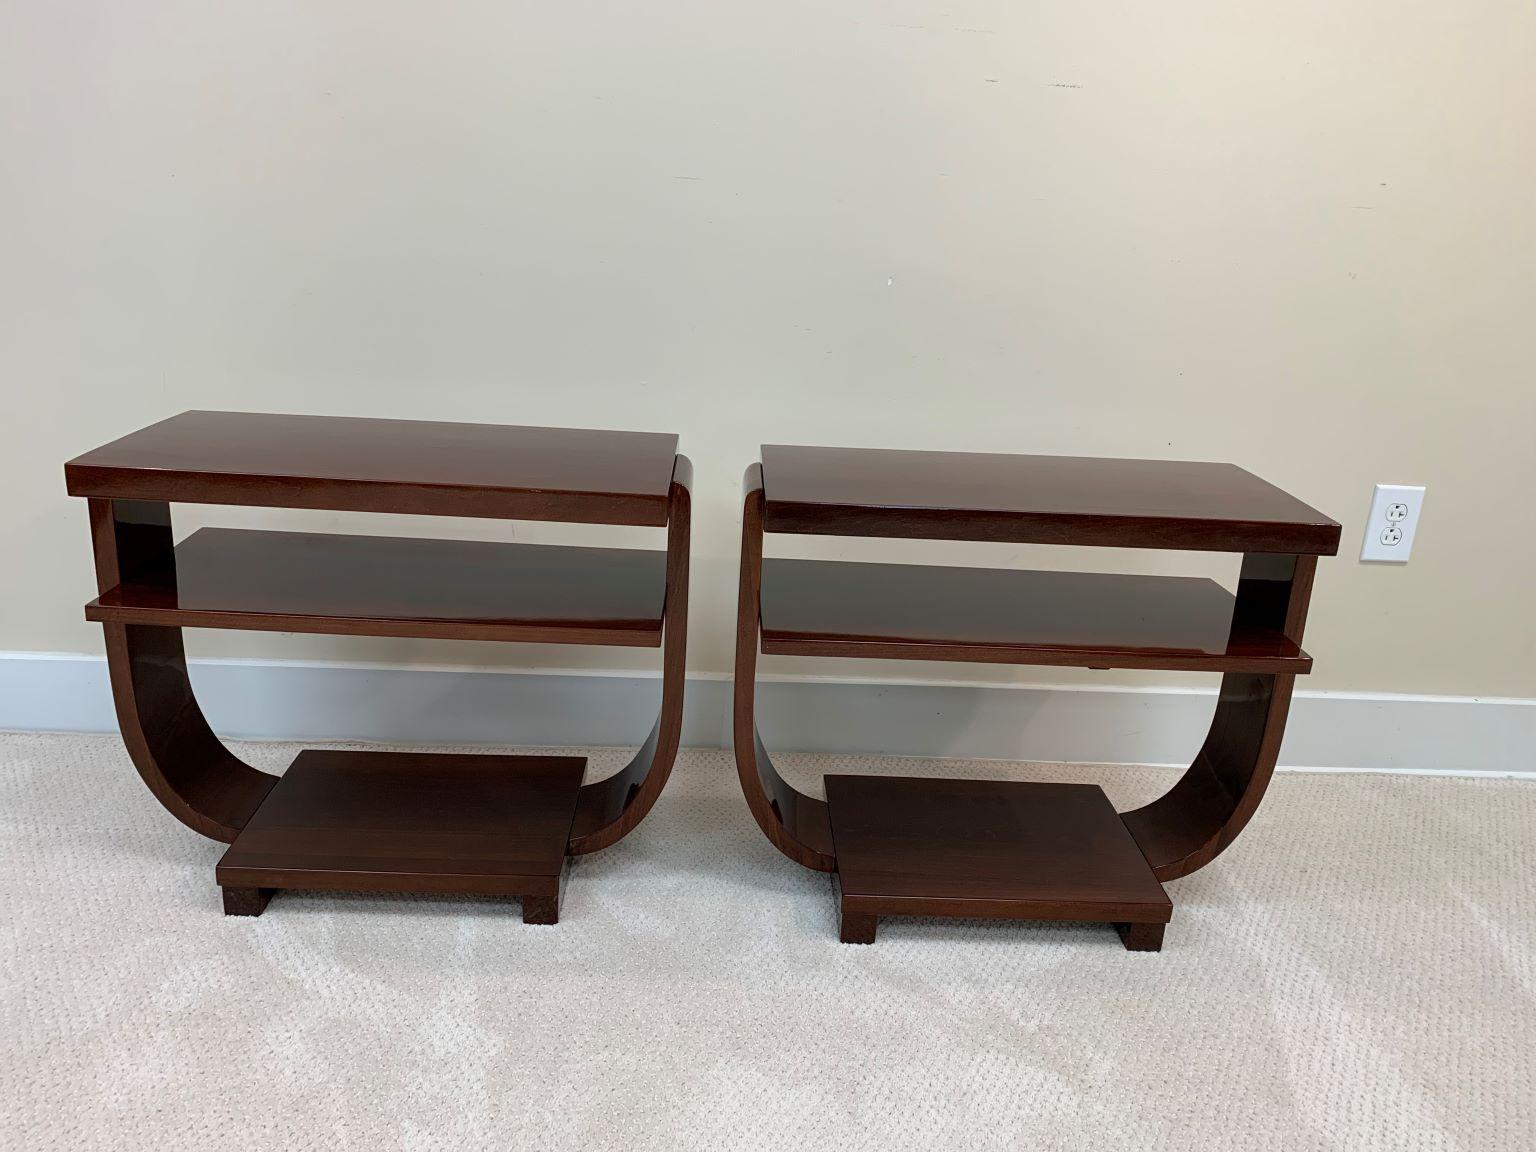 American Art Deco Machine Age End Tables by Modernage Furniture Company, Circa 1930's